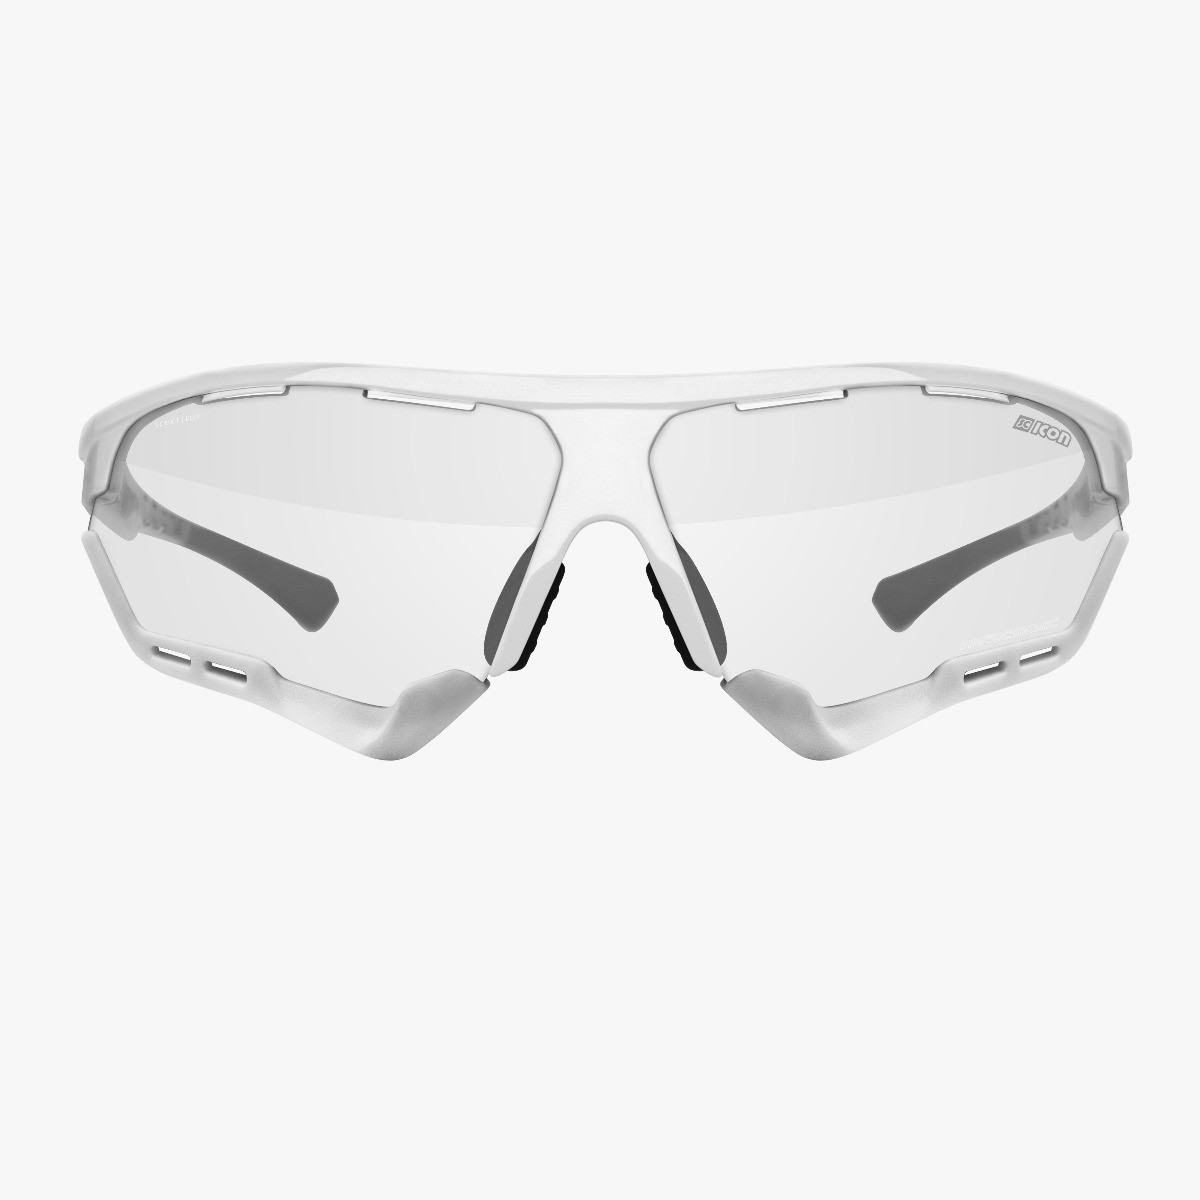 Scicon Sports | Aerocomfort Sport Cycling Performance Sunglasses - White Gloss / Photocromatic Blue - EY15130402
